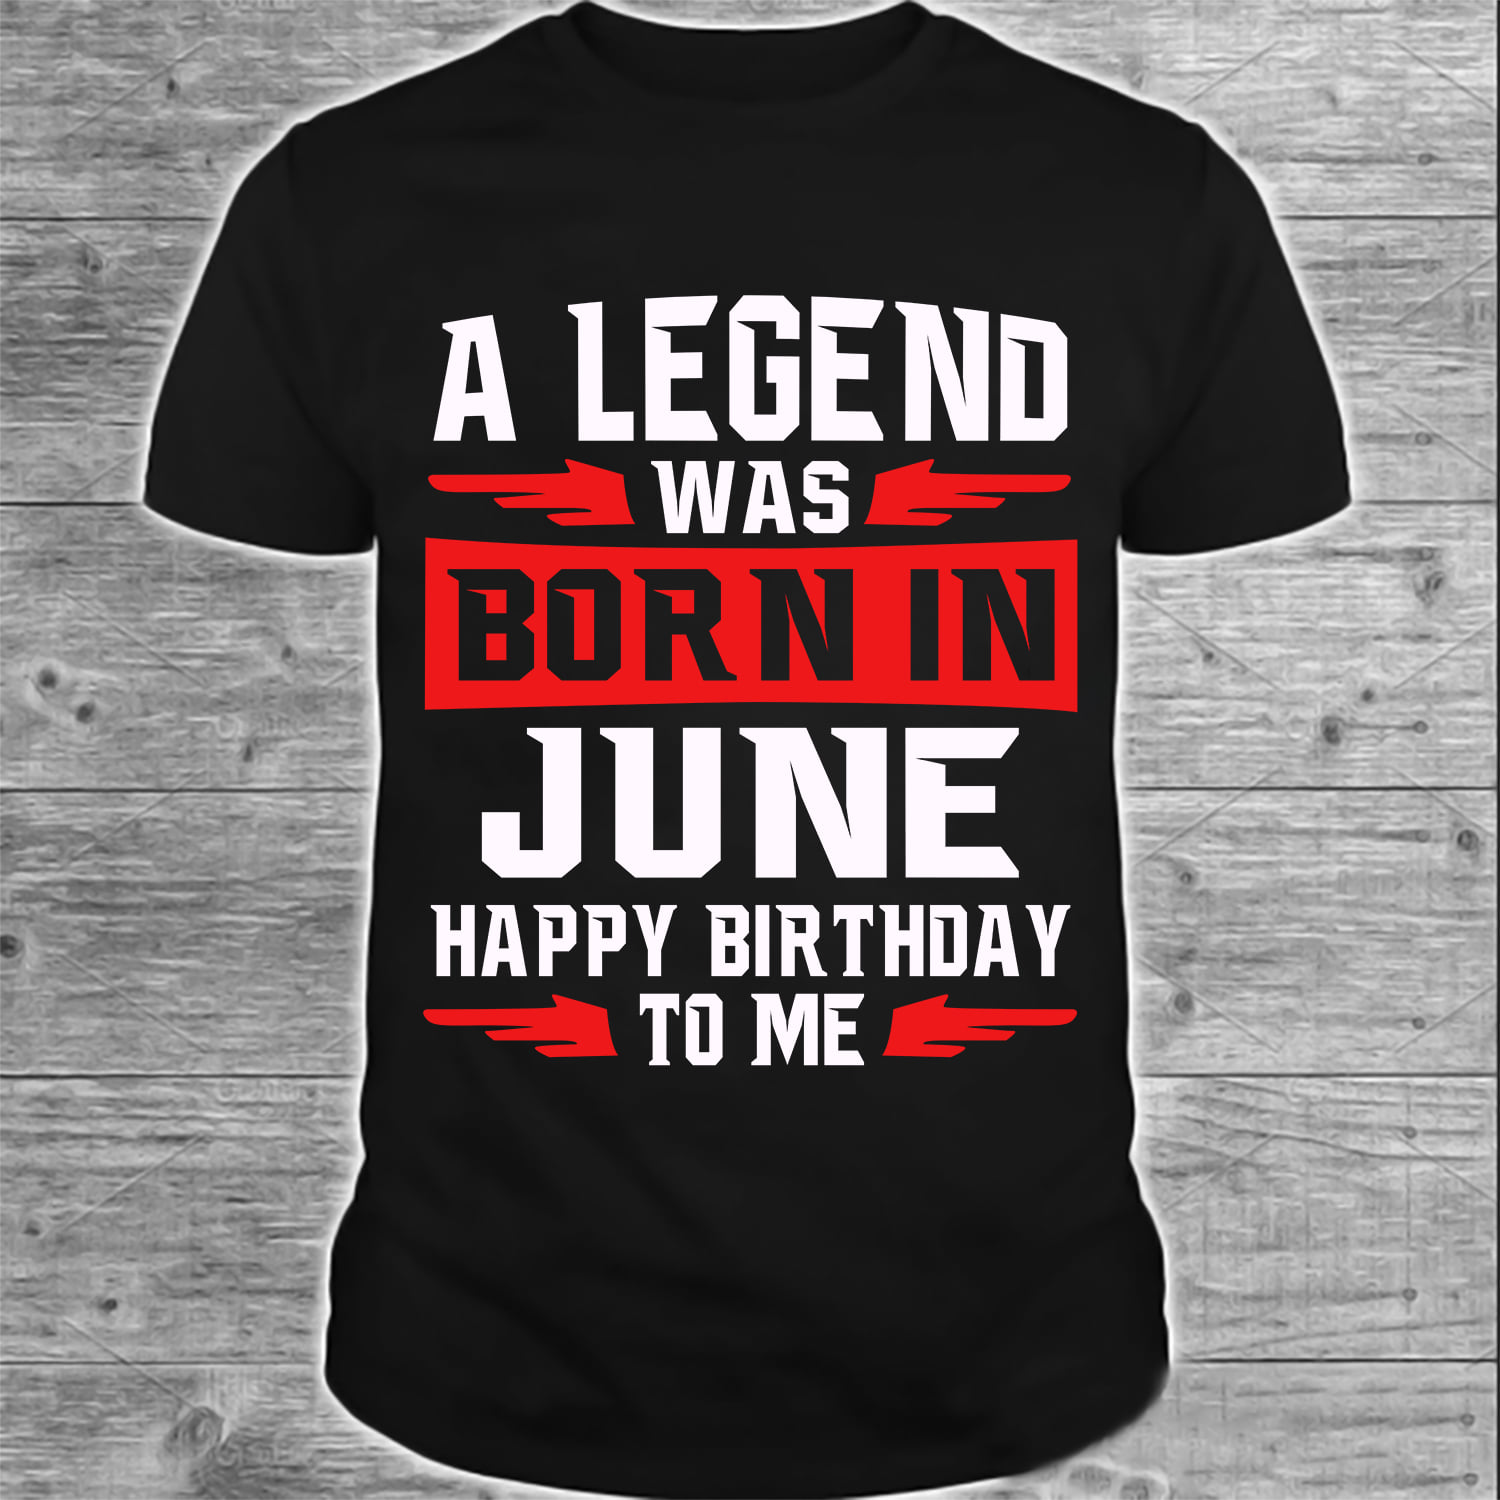 A legend was born in June - Happy birthday to me